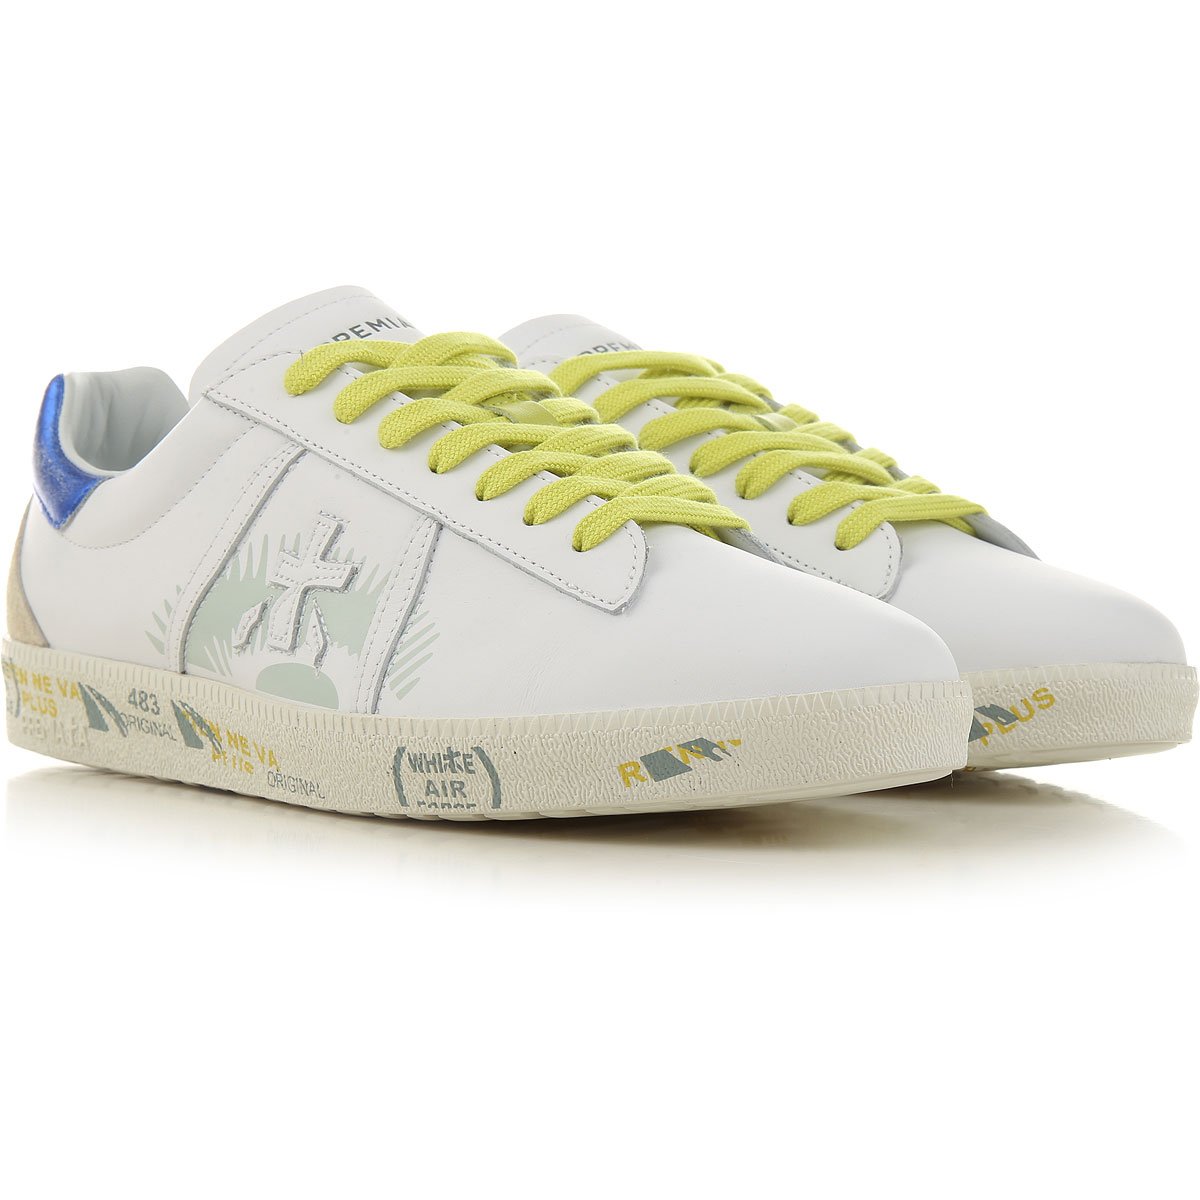 Mens Shoes Premiata, Style code: andy-5142-